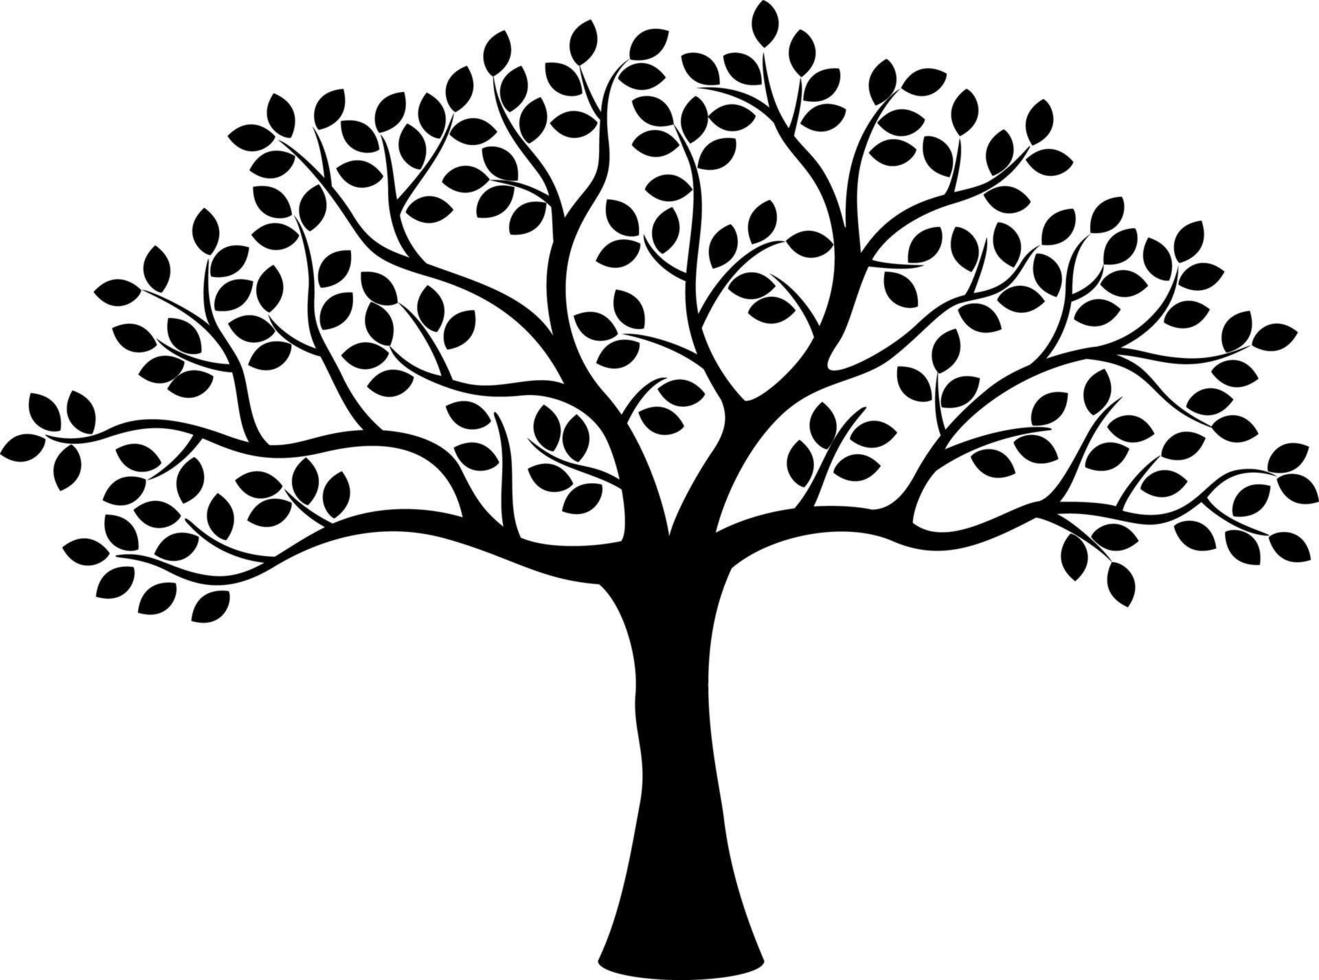 Tree silhouette isolated vector